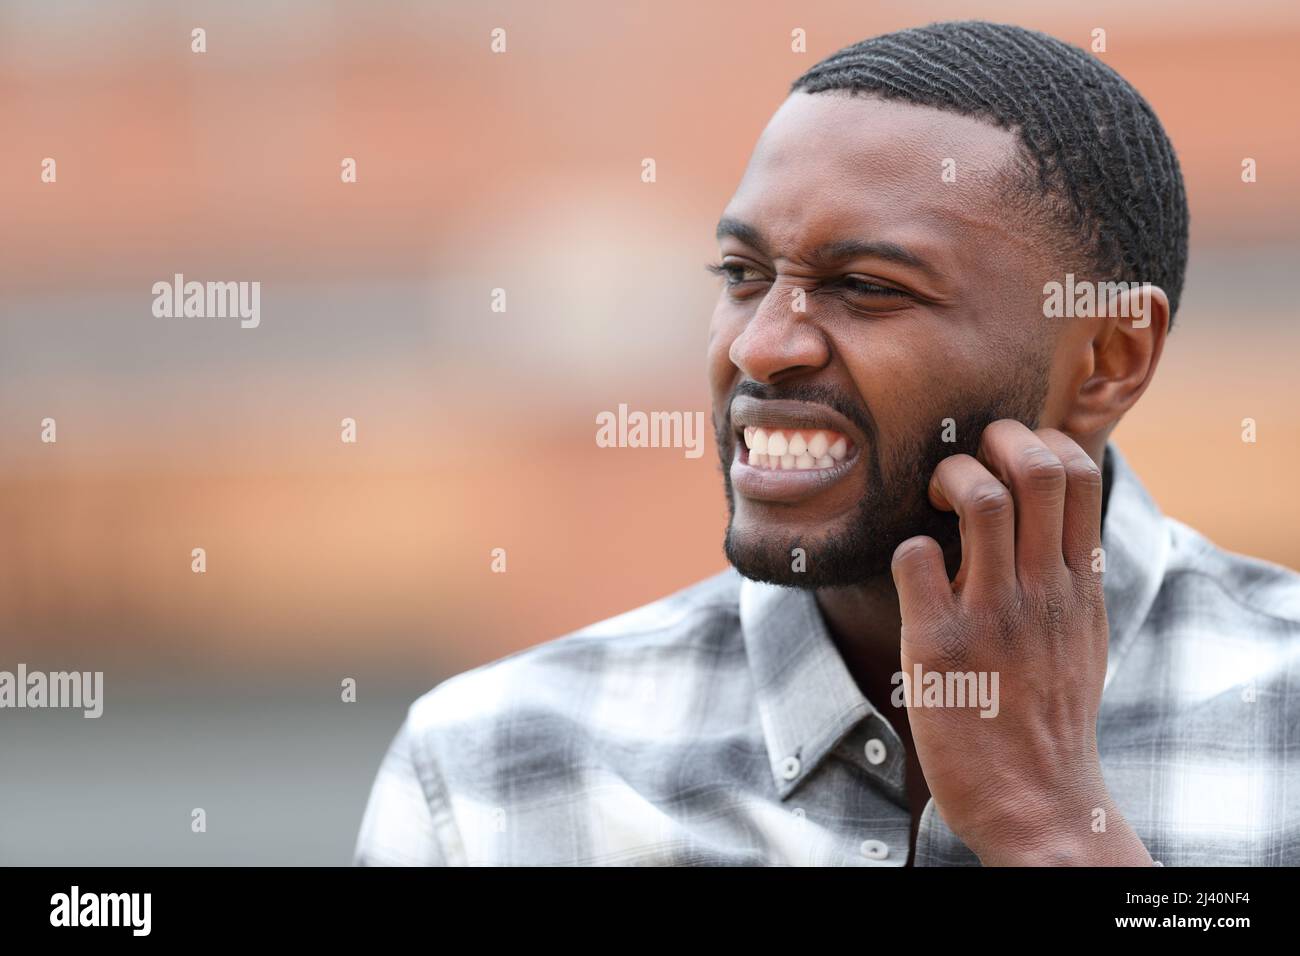 Man with black skin scratching itchy beard in the street Stock Photo